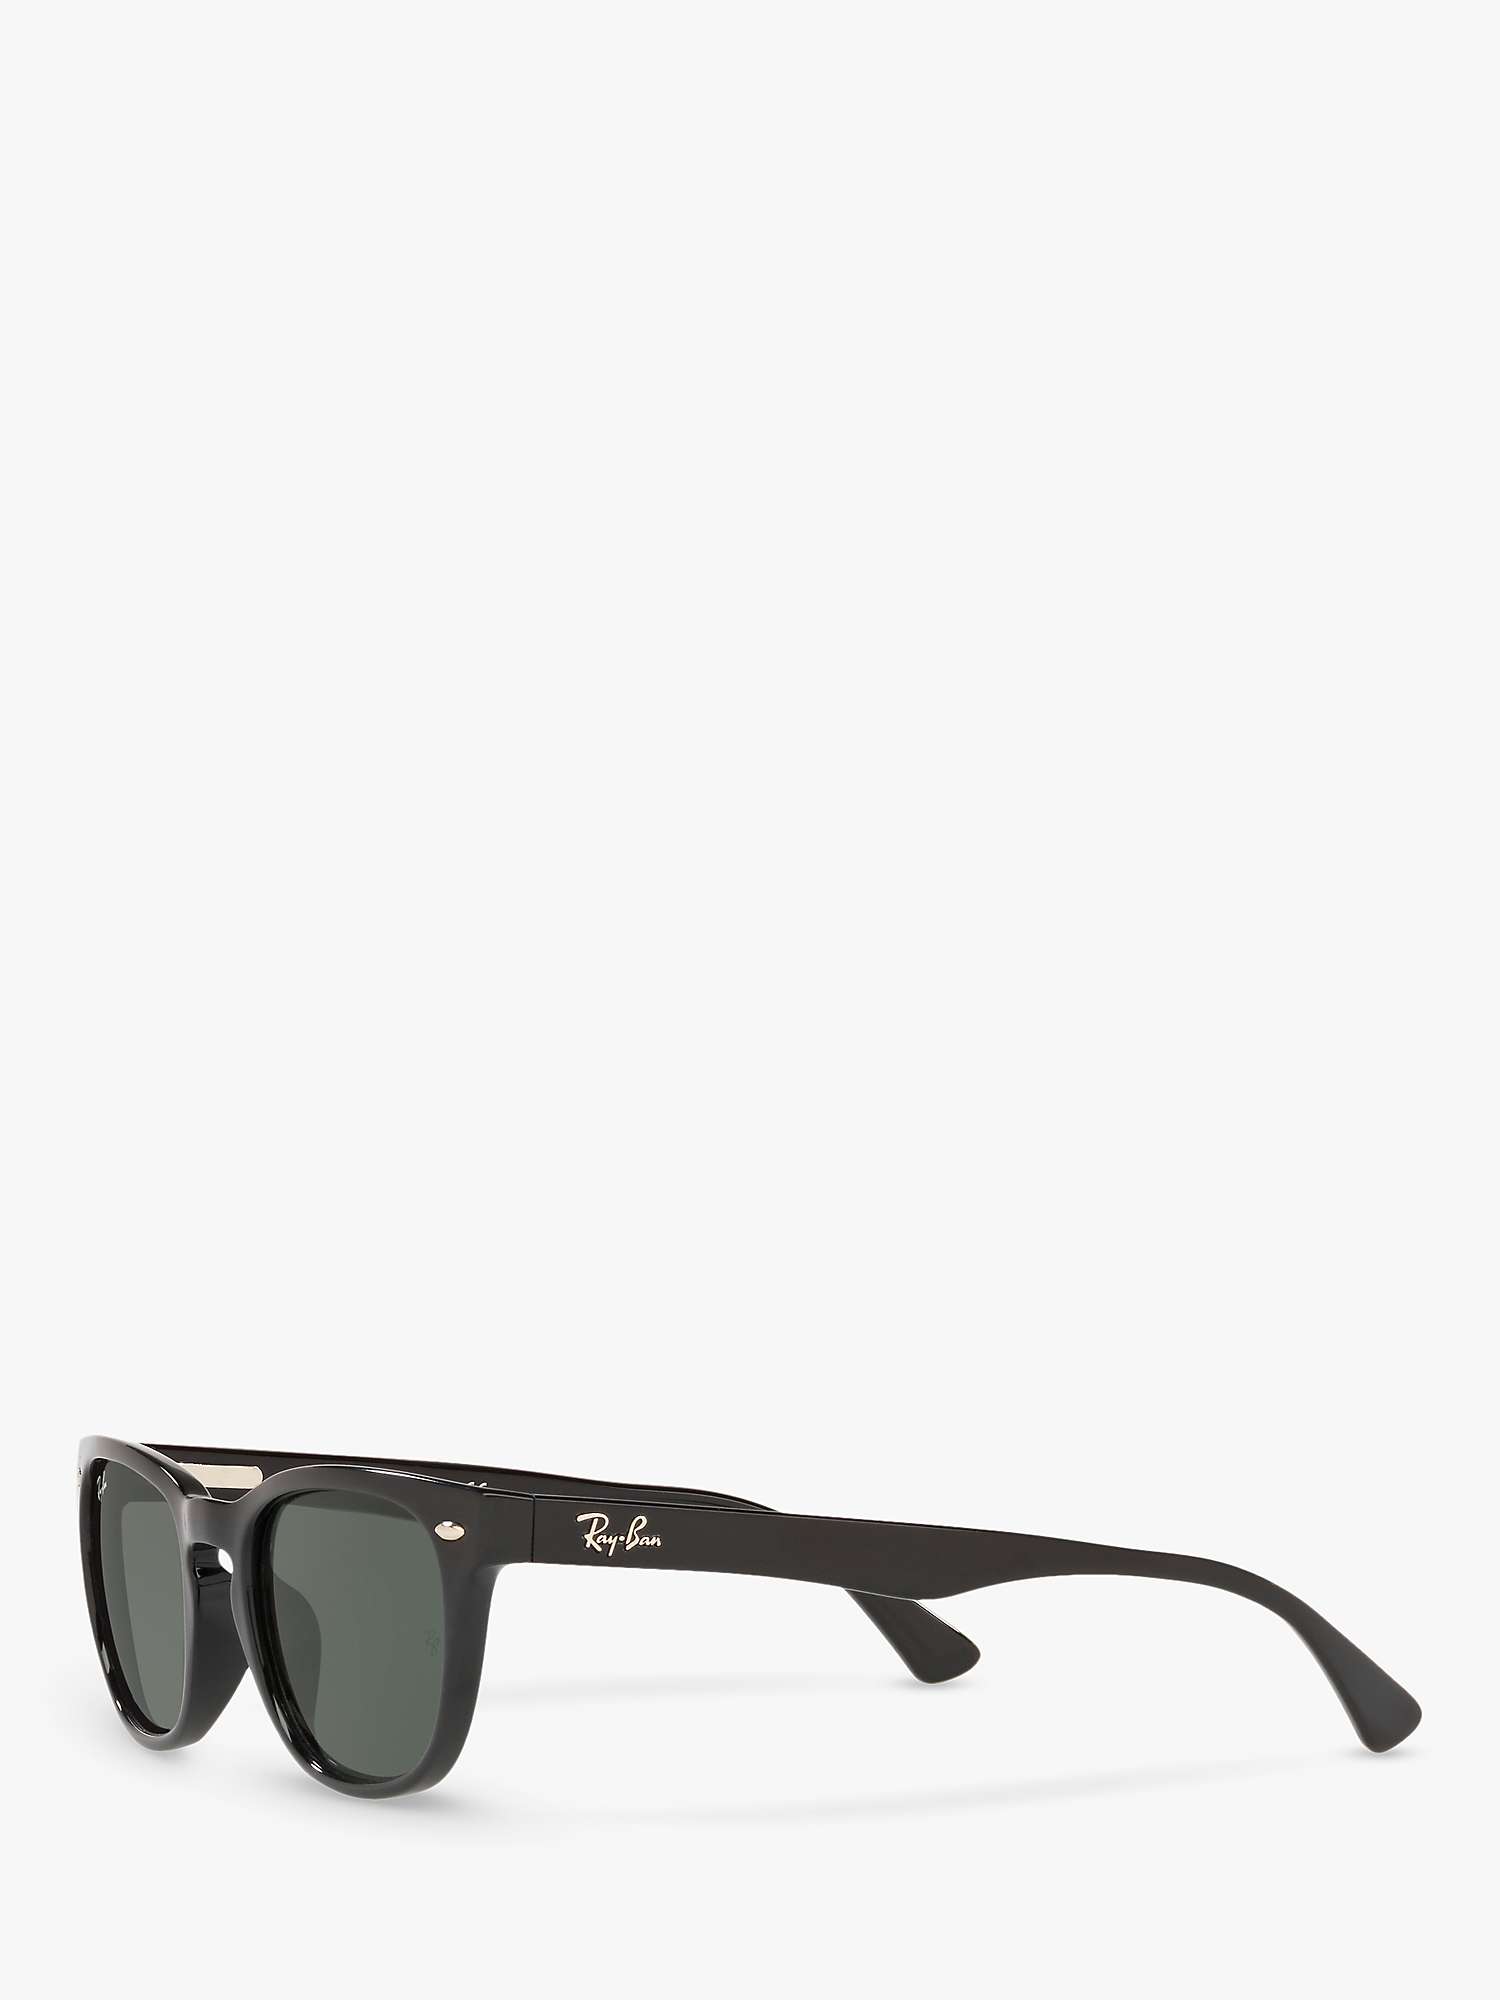 Buy Ray-Ban RB4140 Women's Square Sunglasses, Black/Grey Online at johnlewis.com